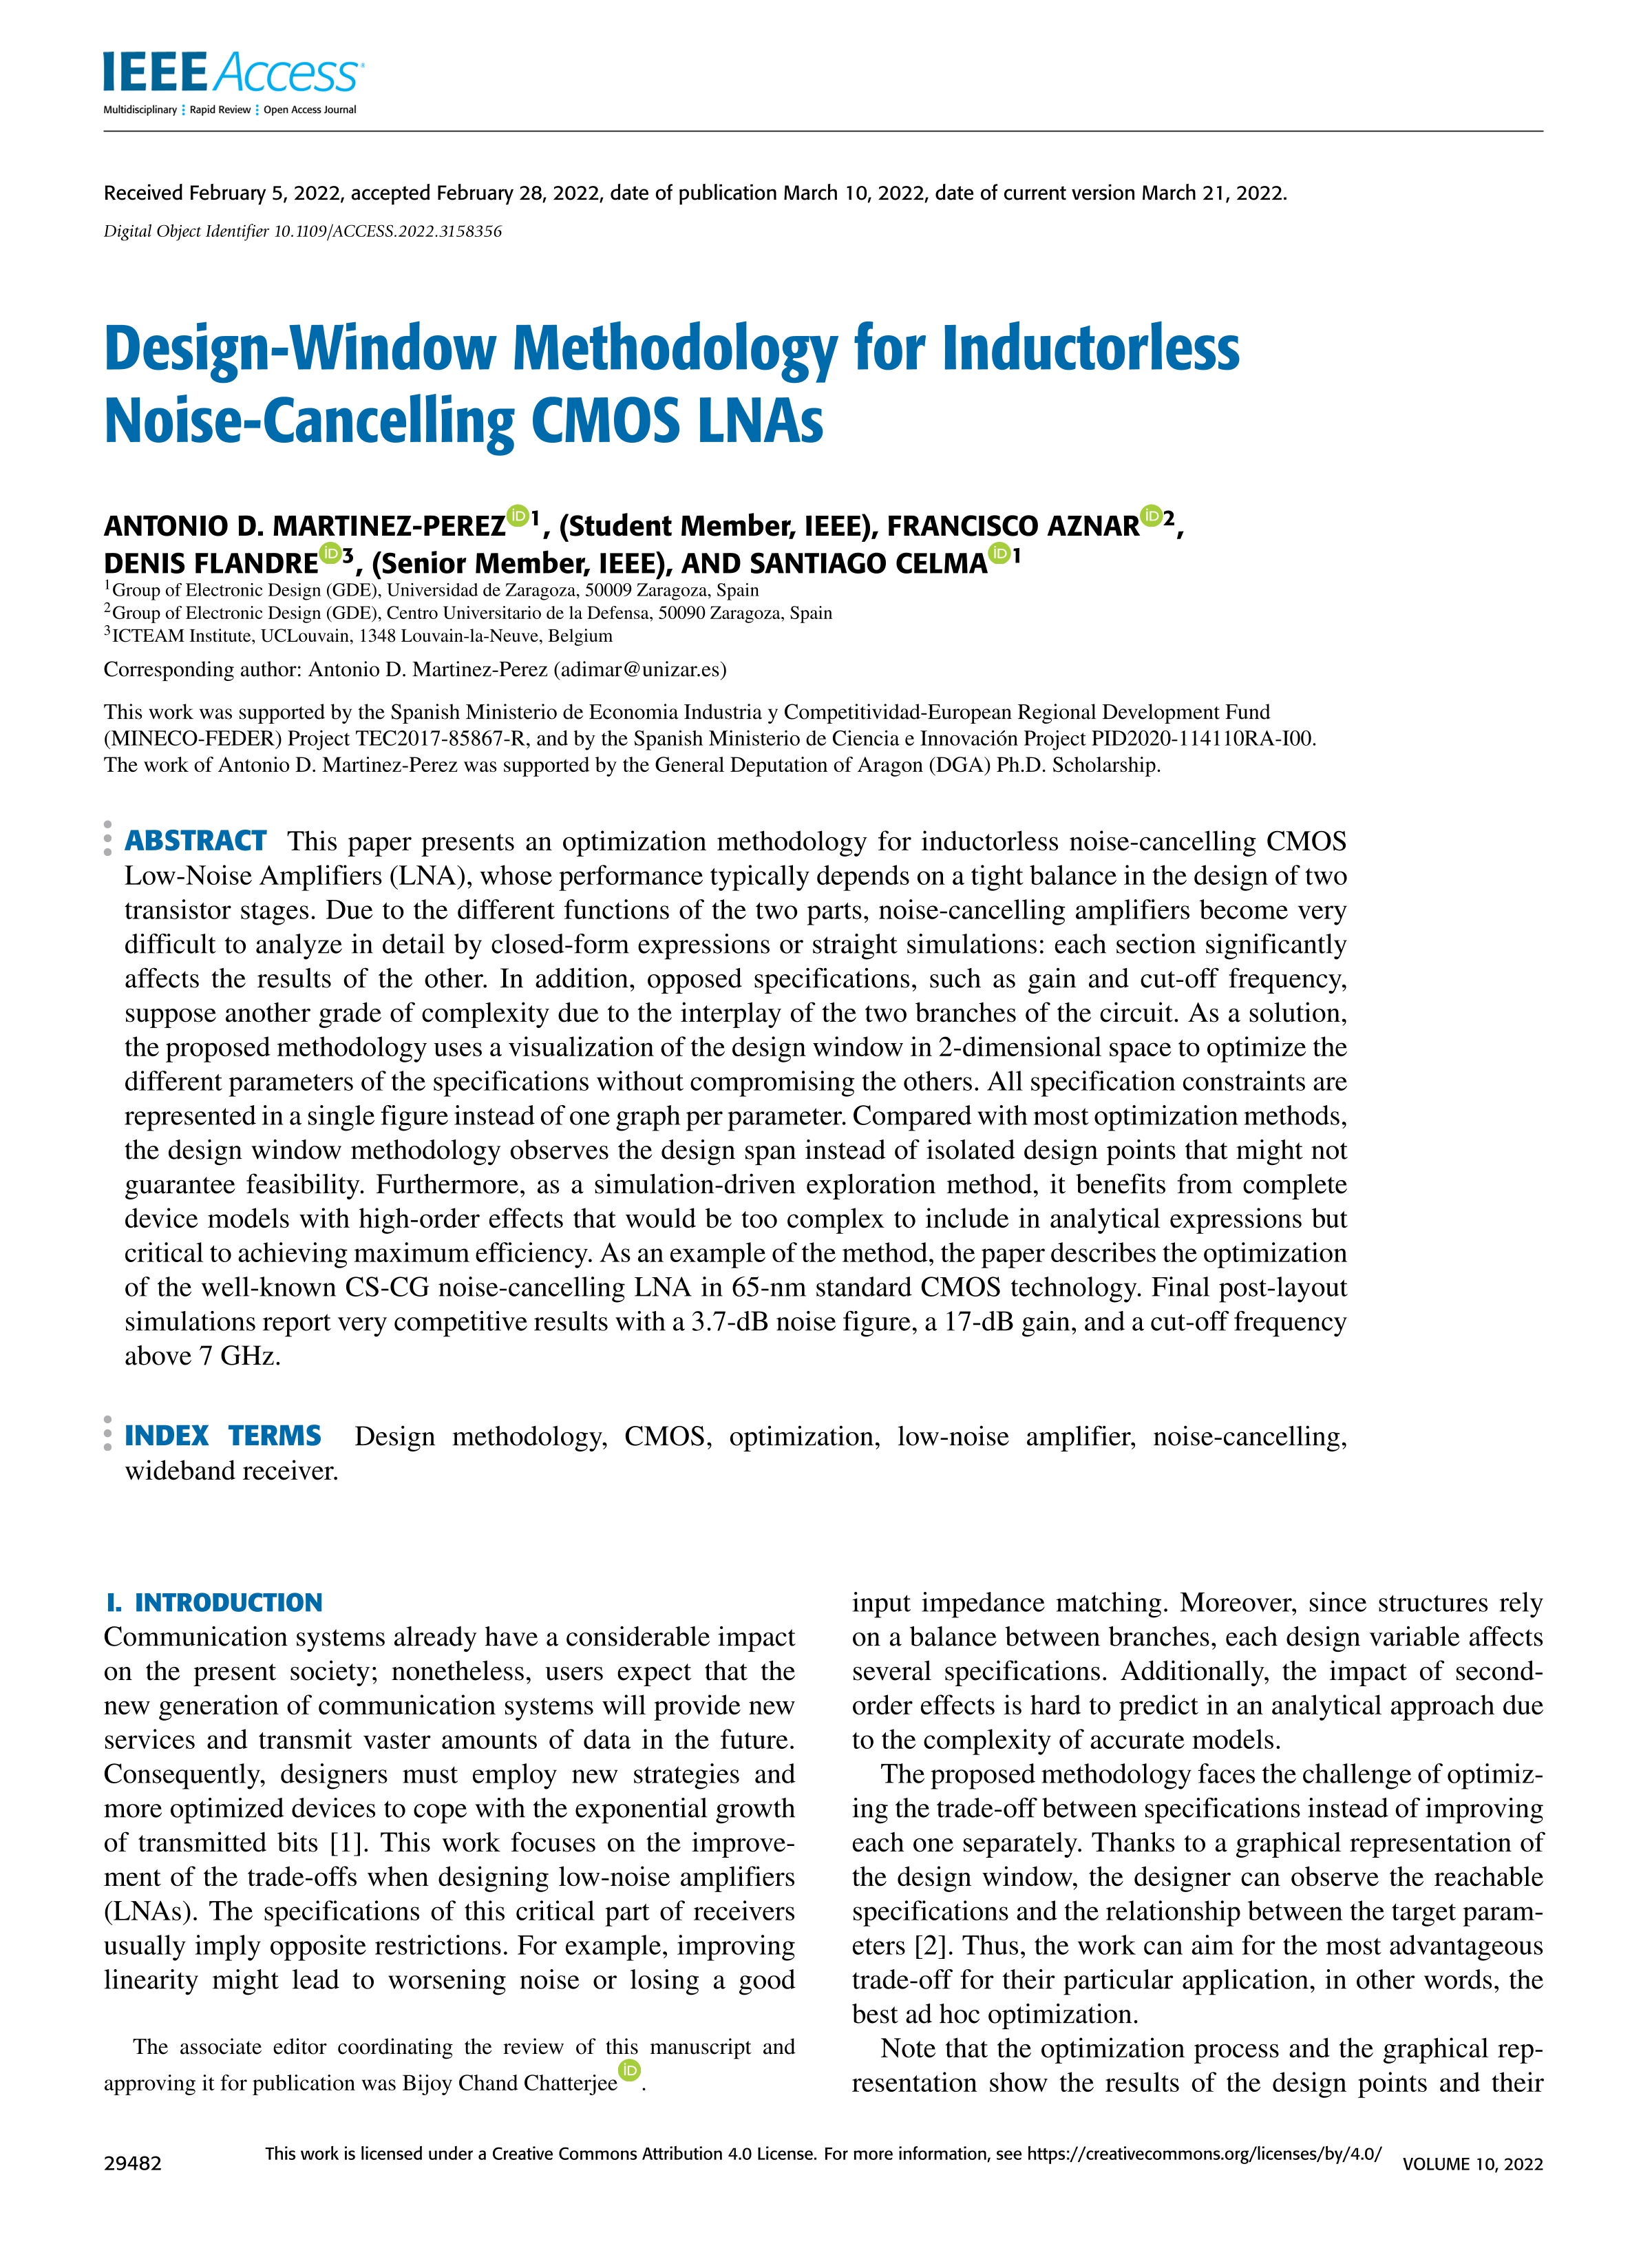 Design-window methodology for inductorless noise-cancelling CMOS LNAs